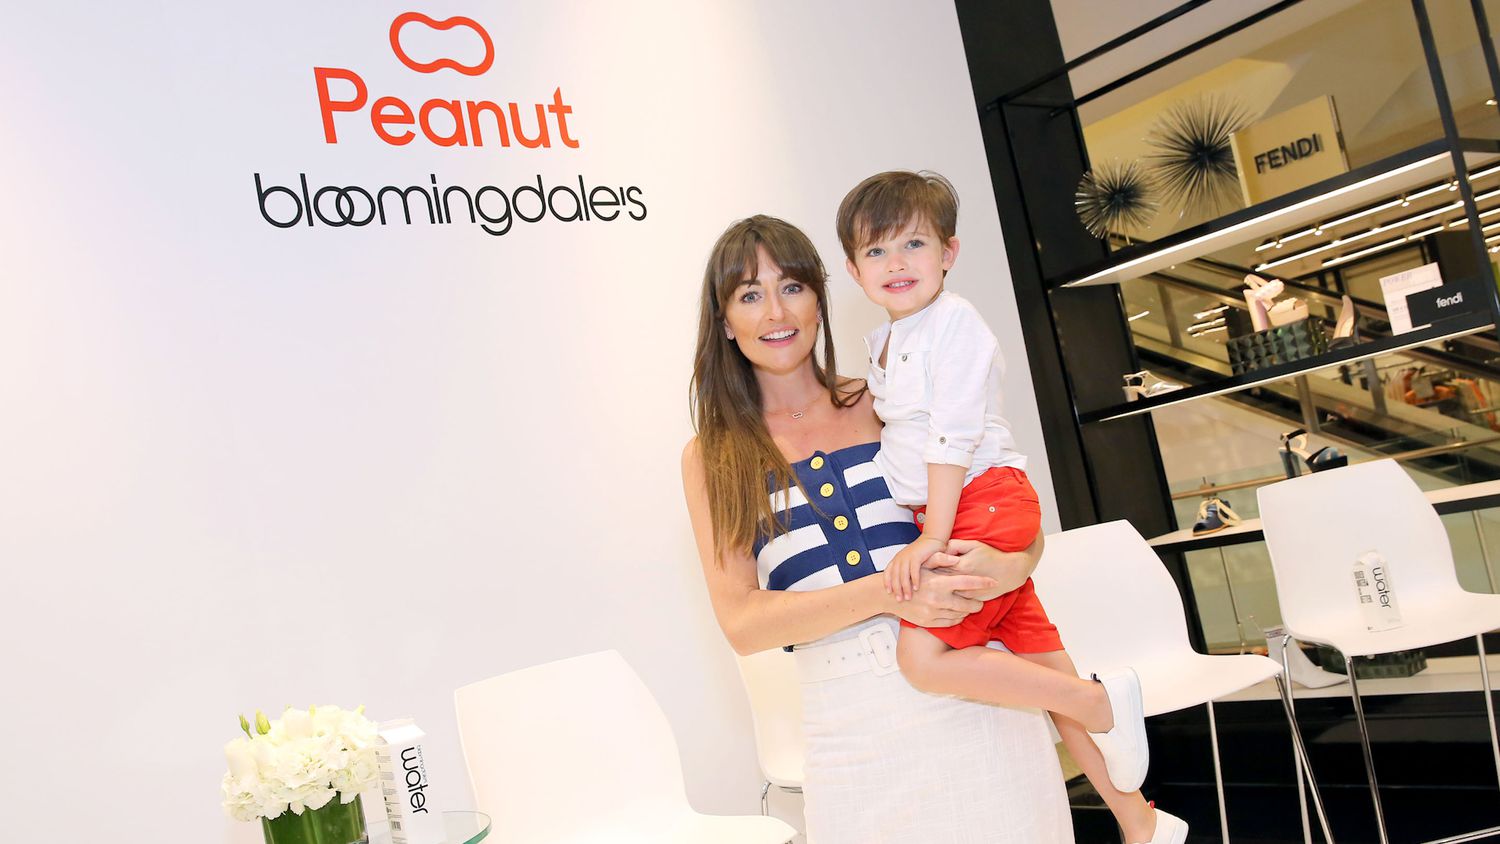 Michelle Kennedy on Launching the Peanut App: 'How I Turned My Struggle to Make Mom-Friends Into a Business'